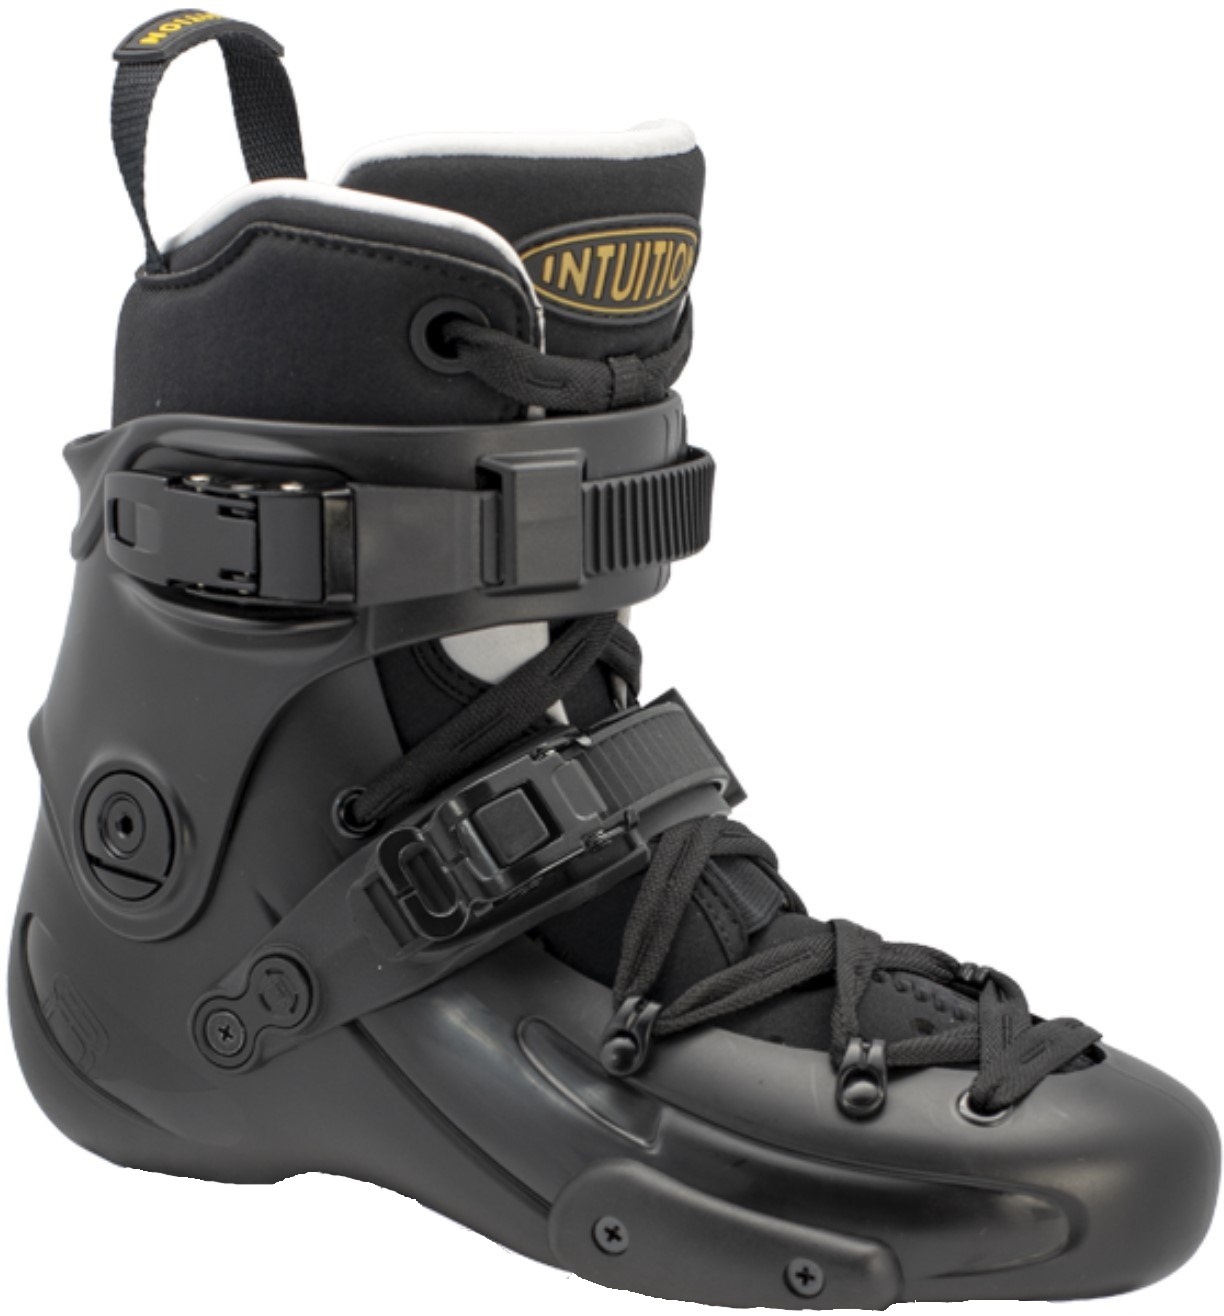 FR1 Deluxe Intuition boot only